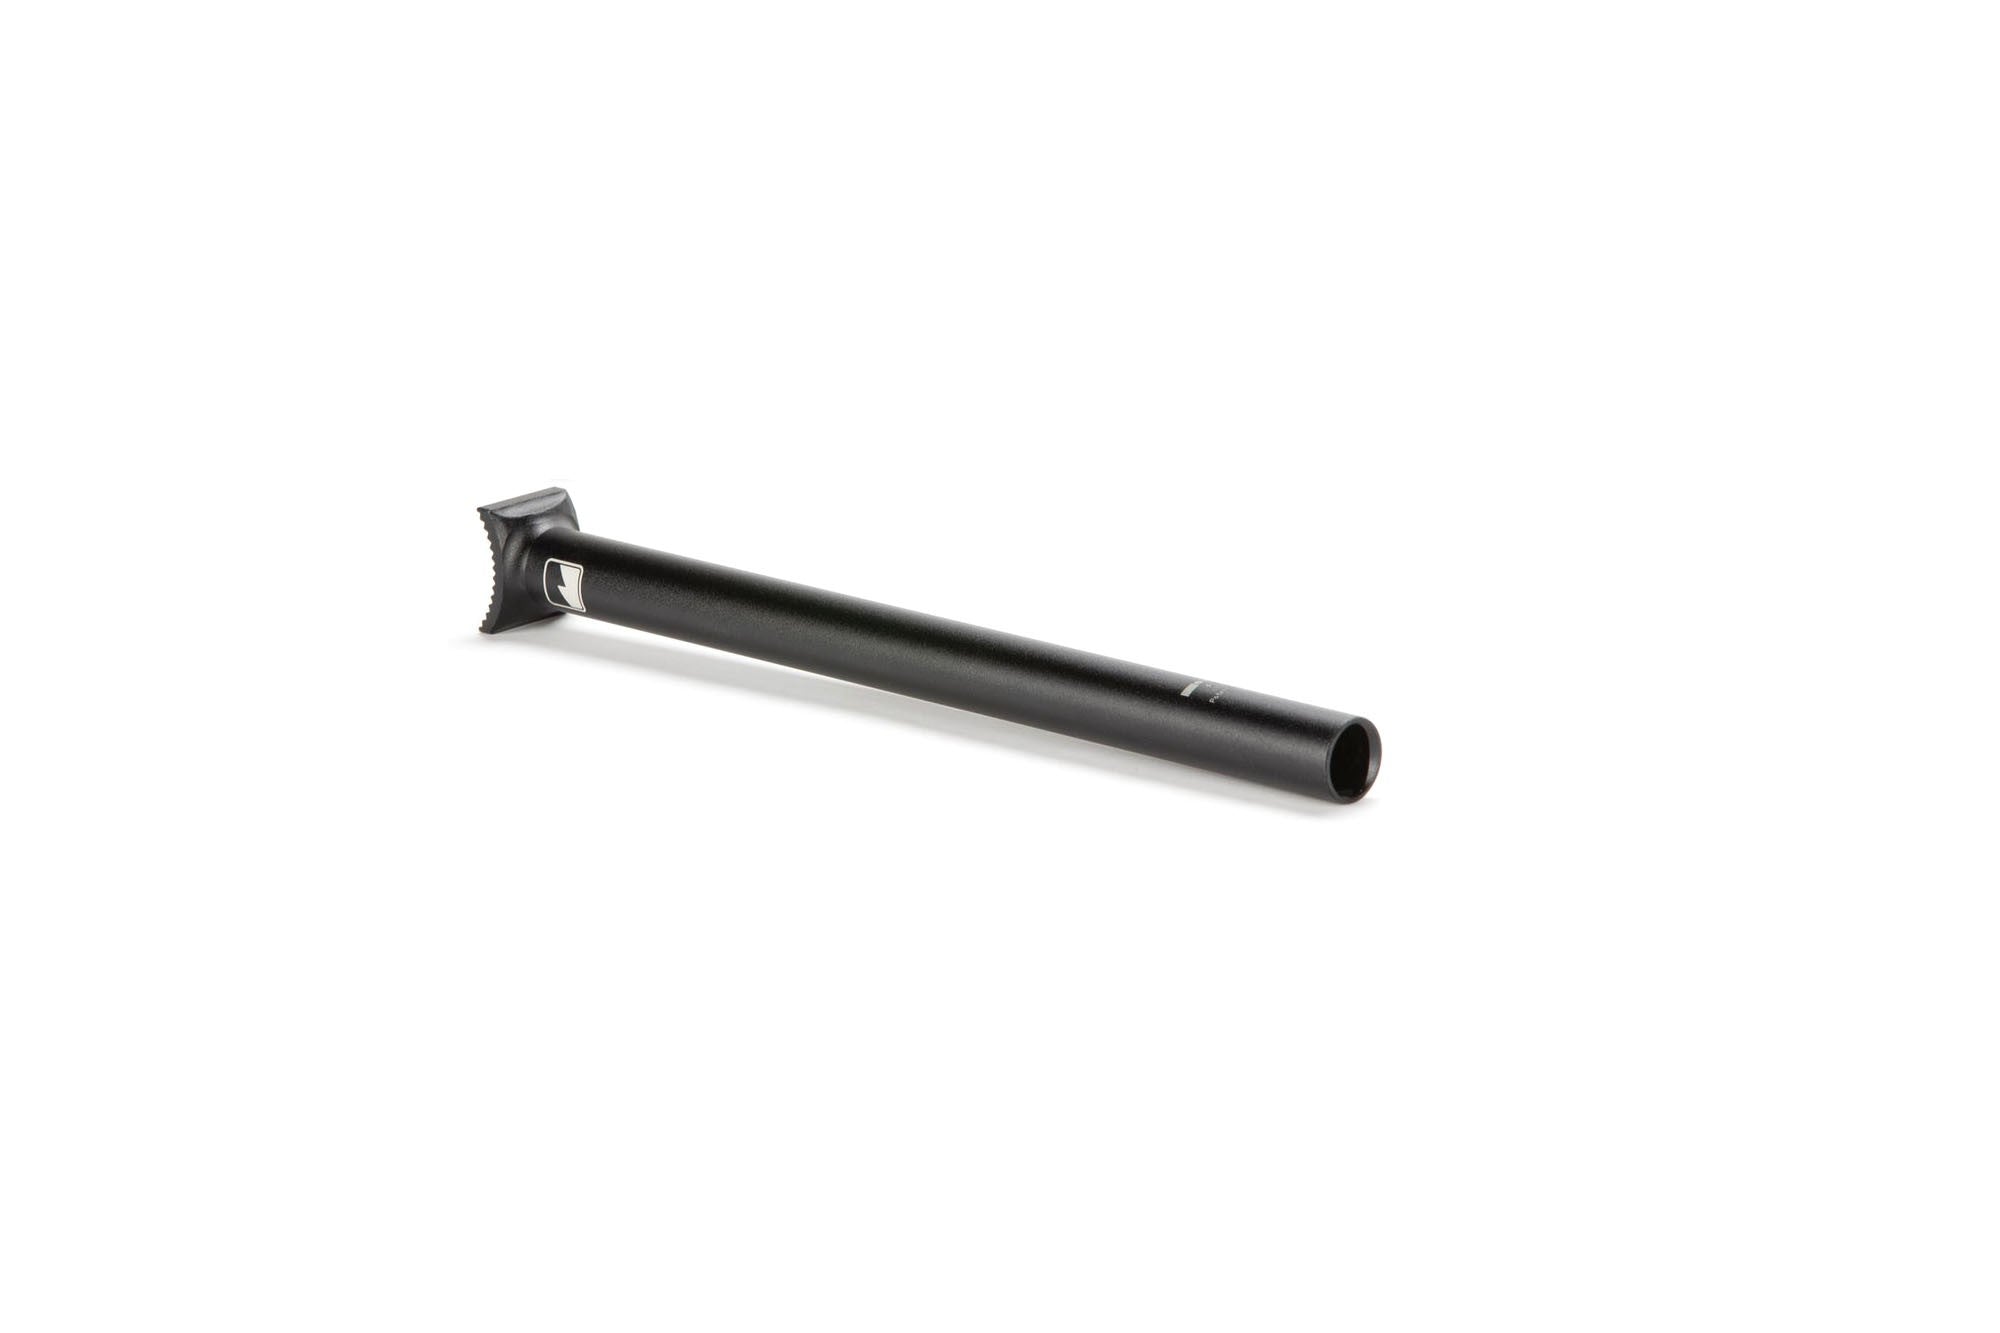 Merritt 330mm Pivotal Seat Post (Black Or Silver) - Downtown Bicycle Works 